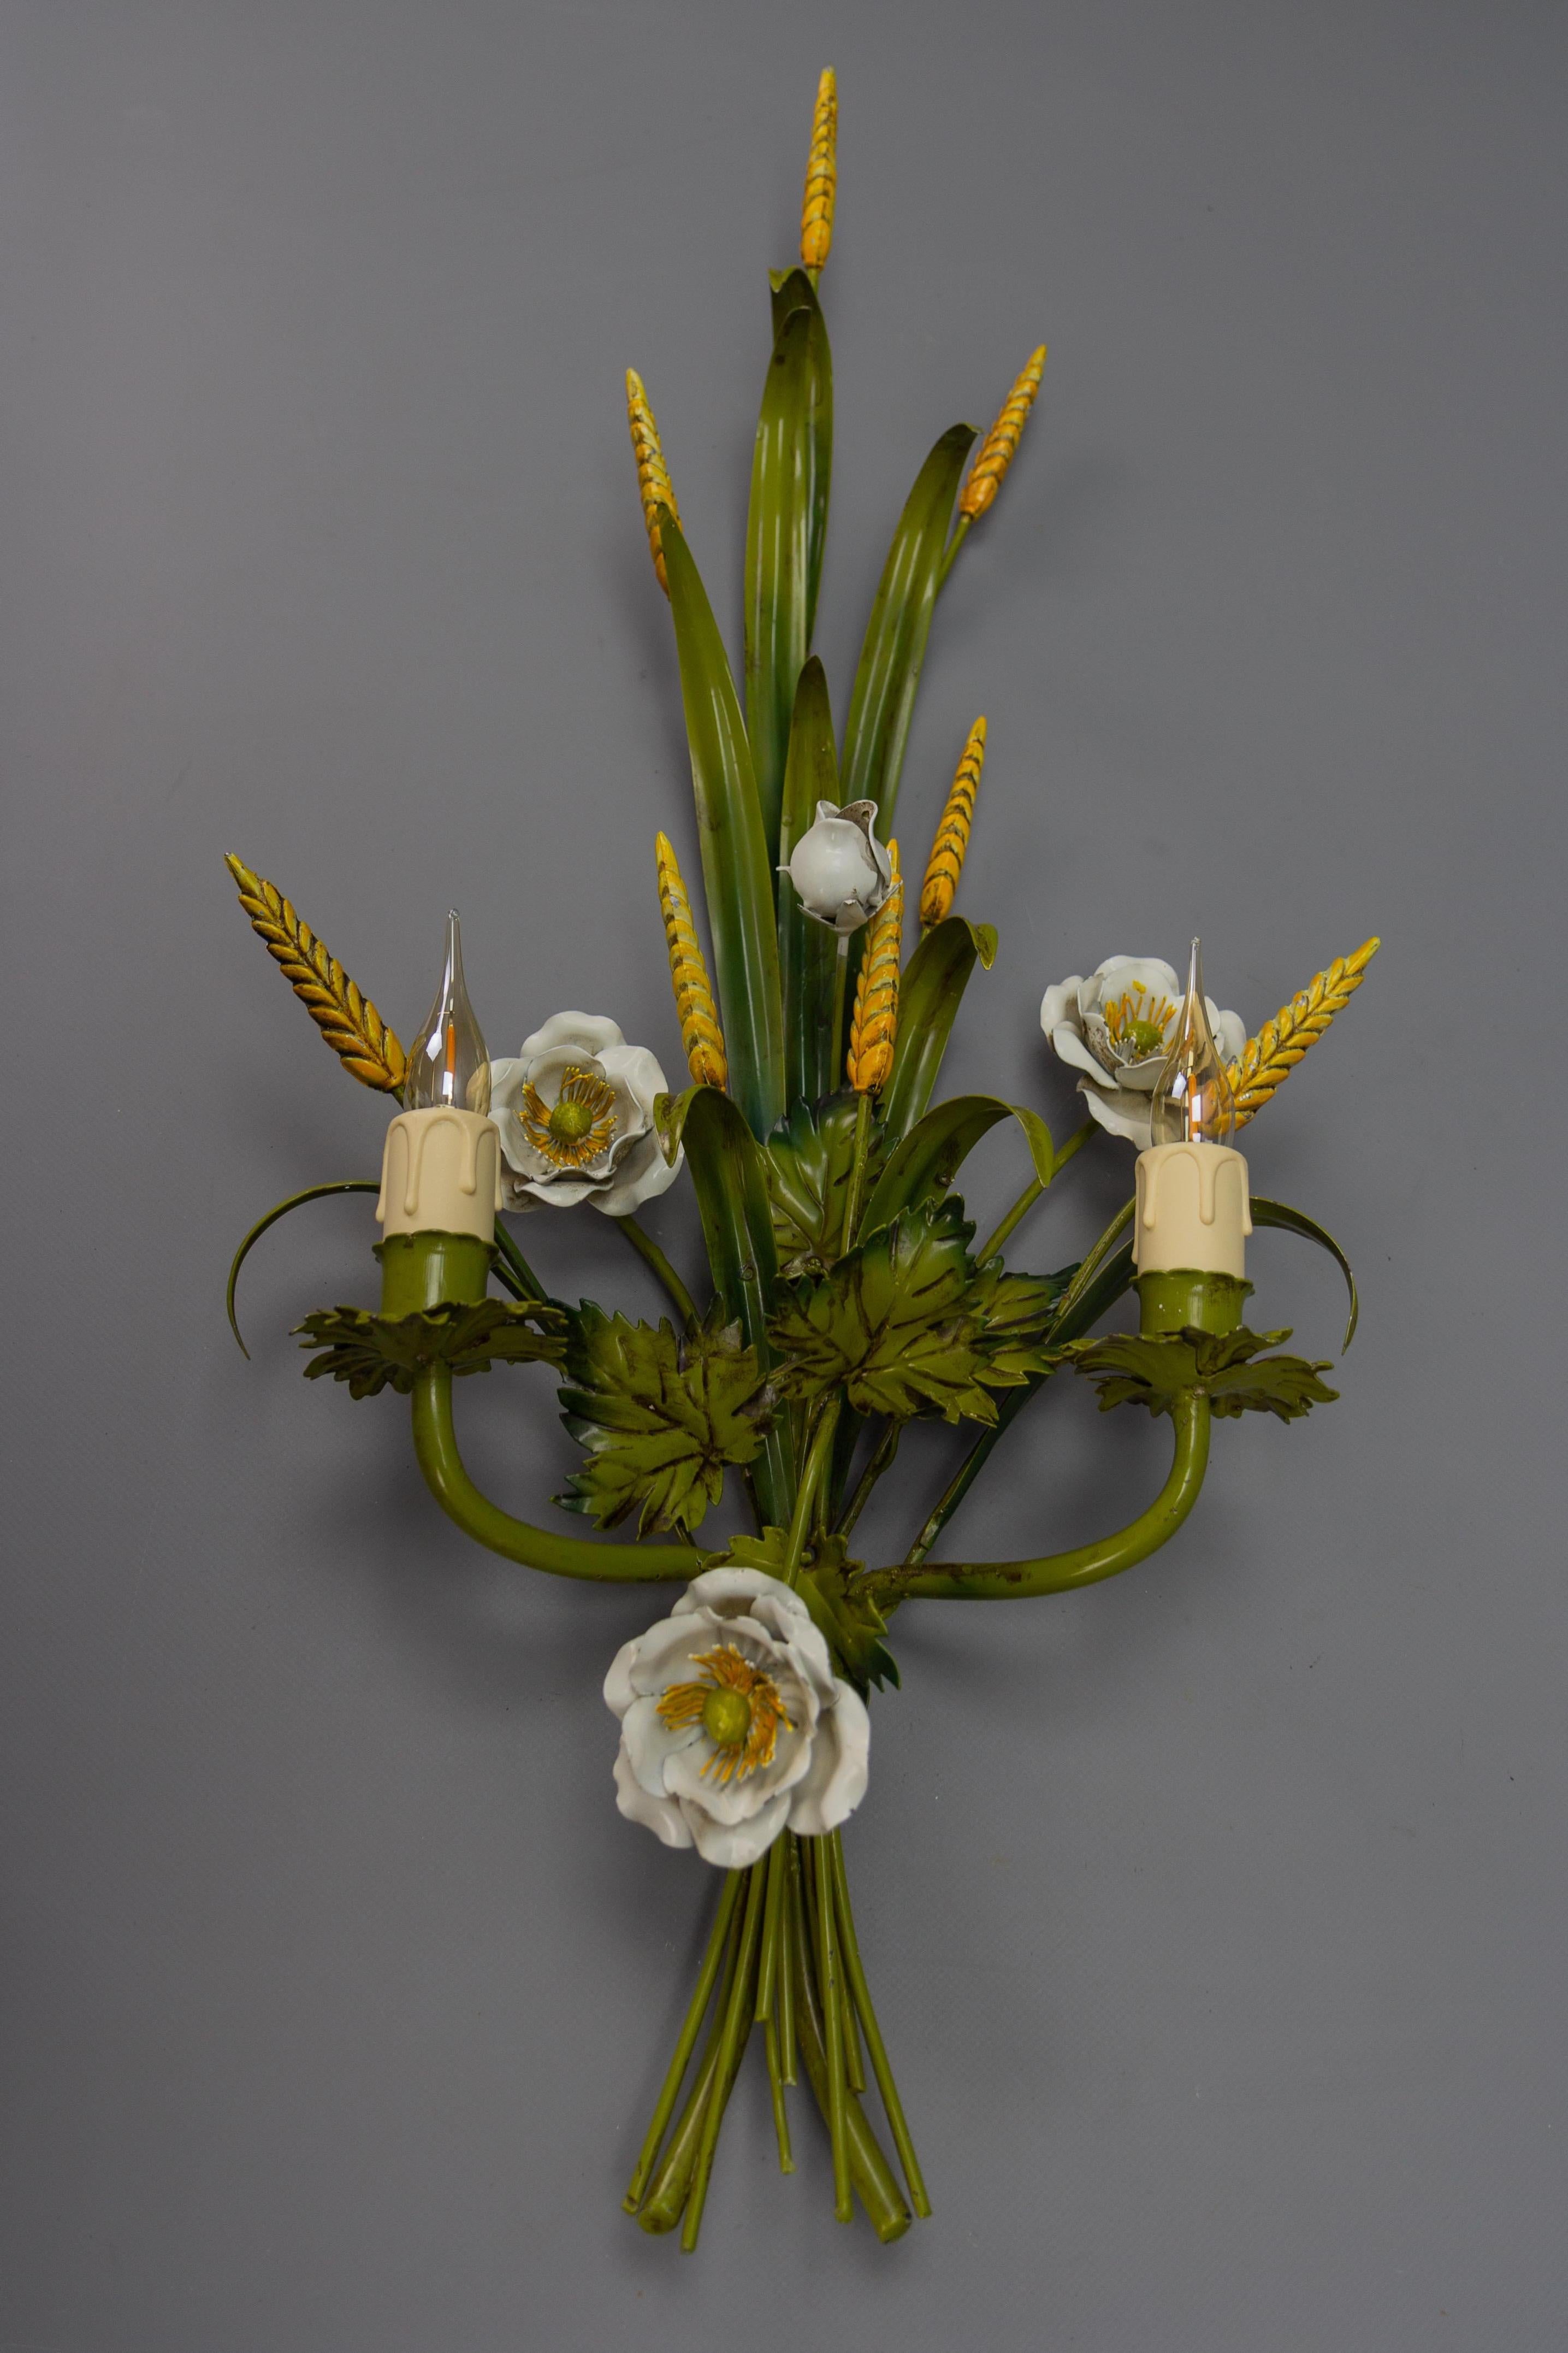 Italian toleware white poppy and wheat green floral bouquet two-light sconce from circa the 1960s.
A decorative Italian toleware twin-light wall lamp painted in white, green, and yellow colors, featuring a bouquet of white poppies, wheats, and